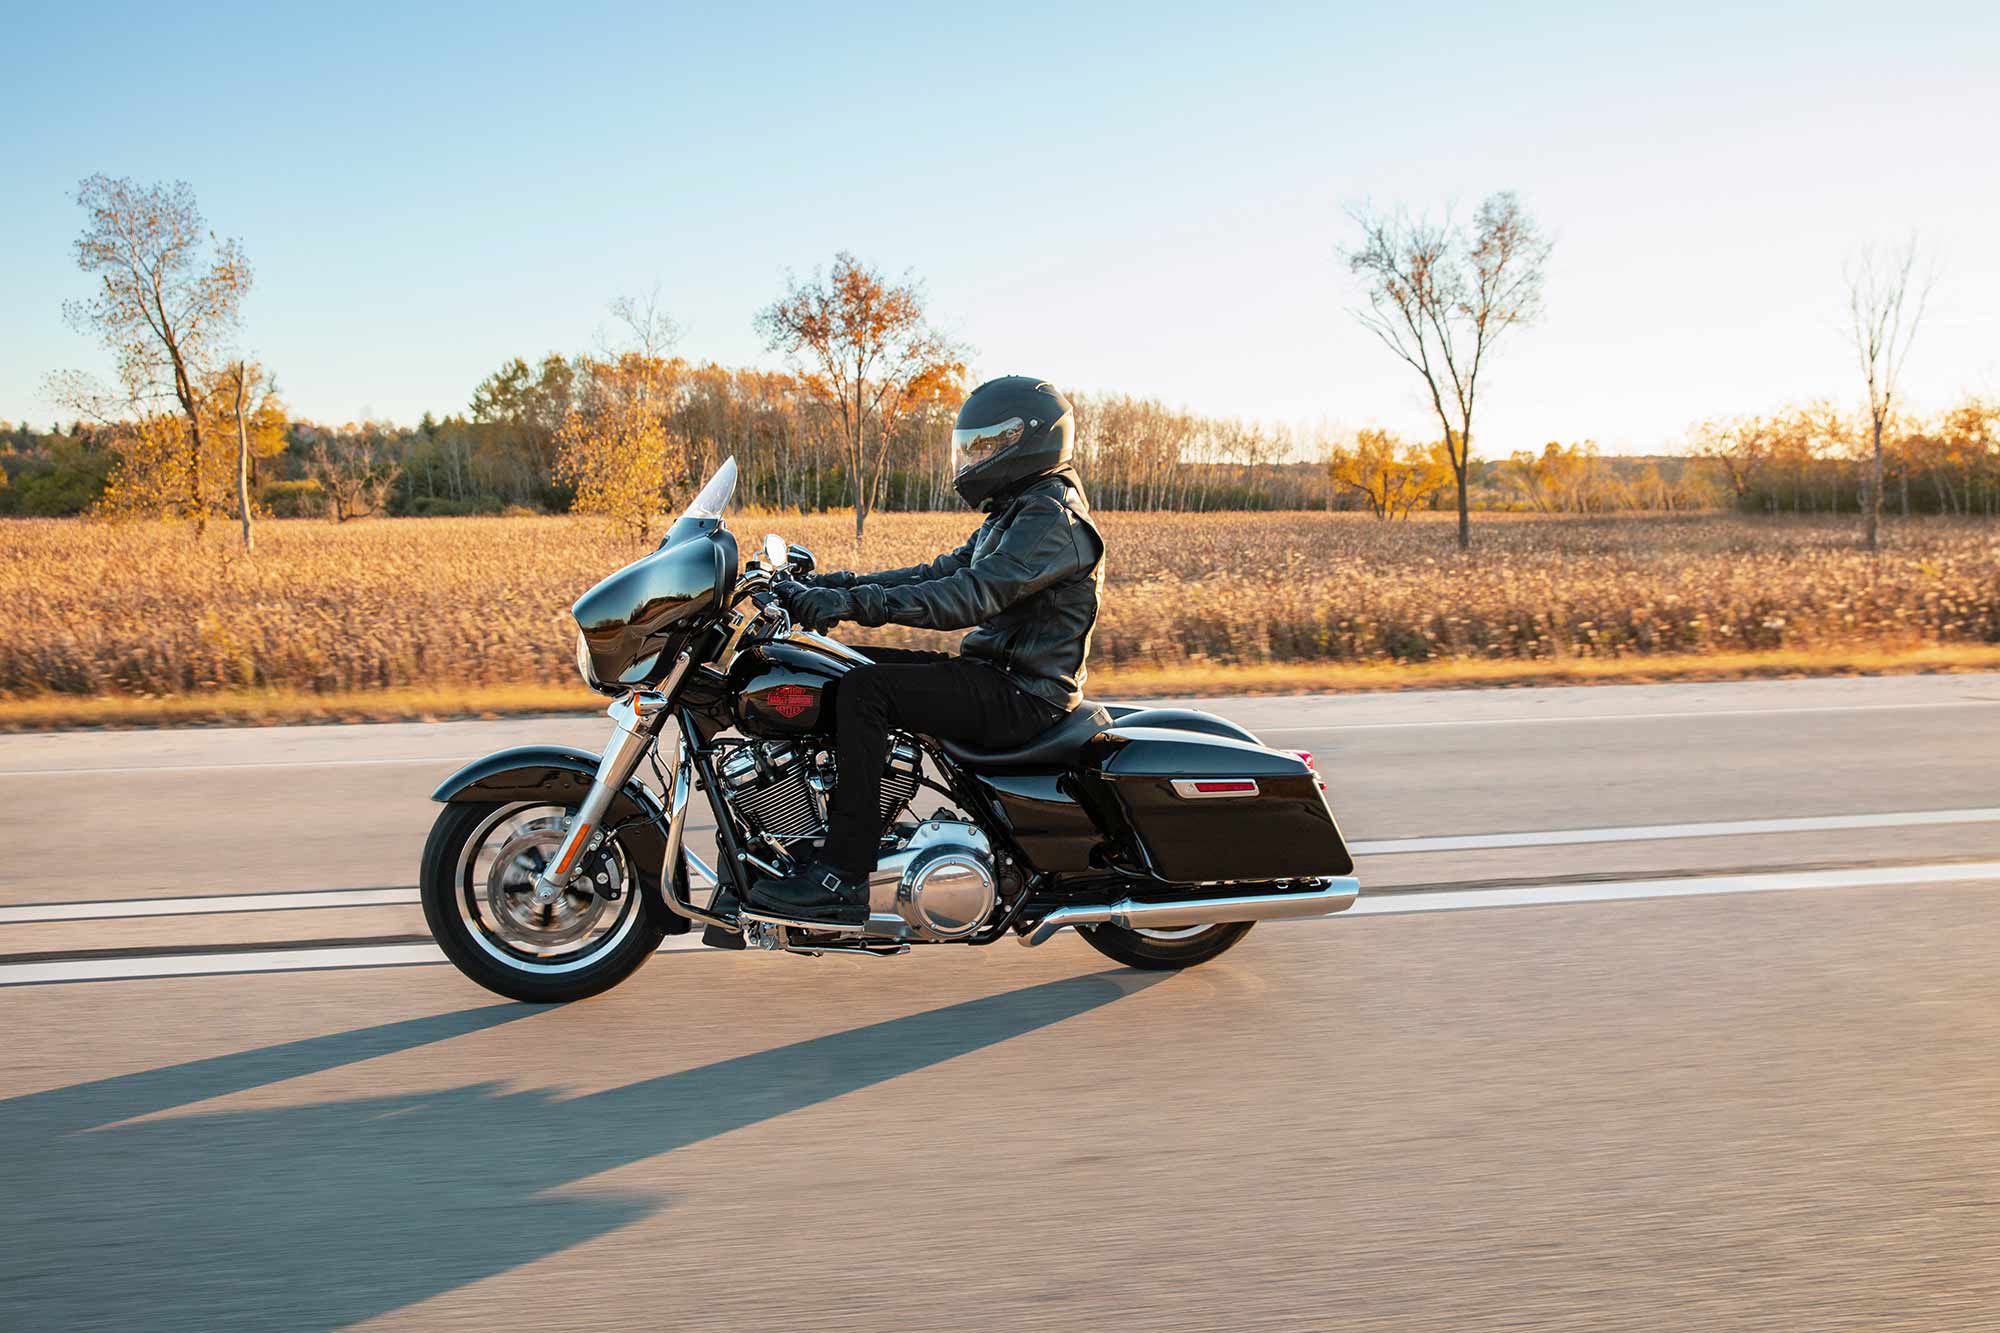 Upgrade the Harley-Davidson Electra Glide Standard with a two-up seat and passenger backrest and you’ll be ready to roll. Photo: Harley-Davidson.